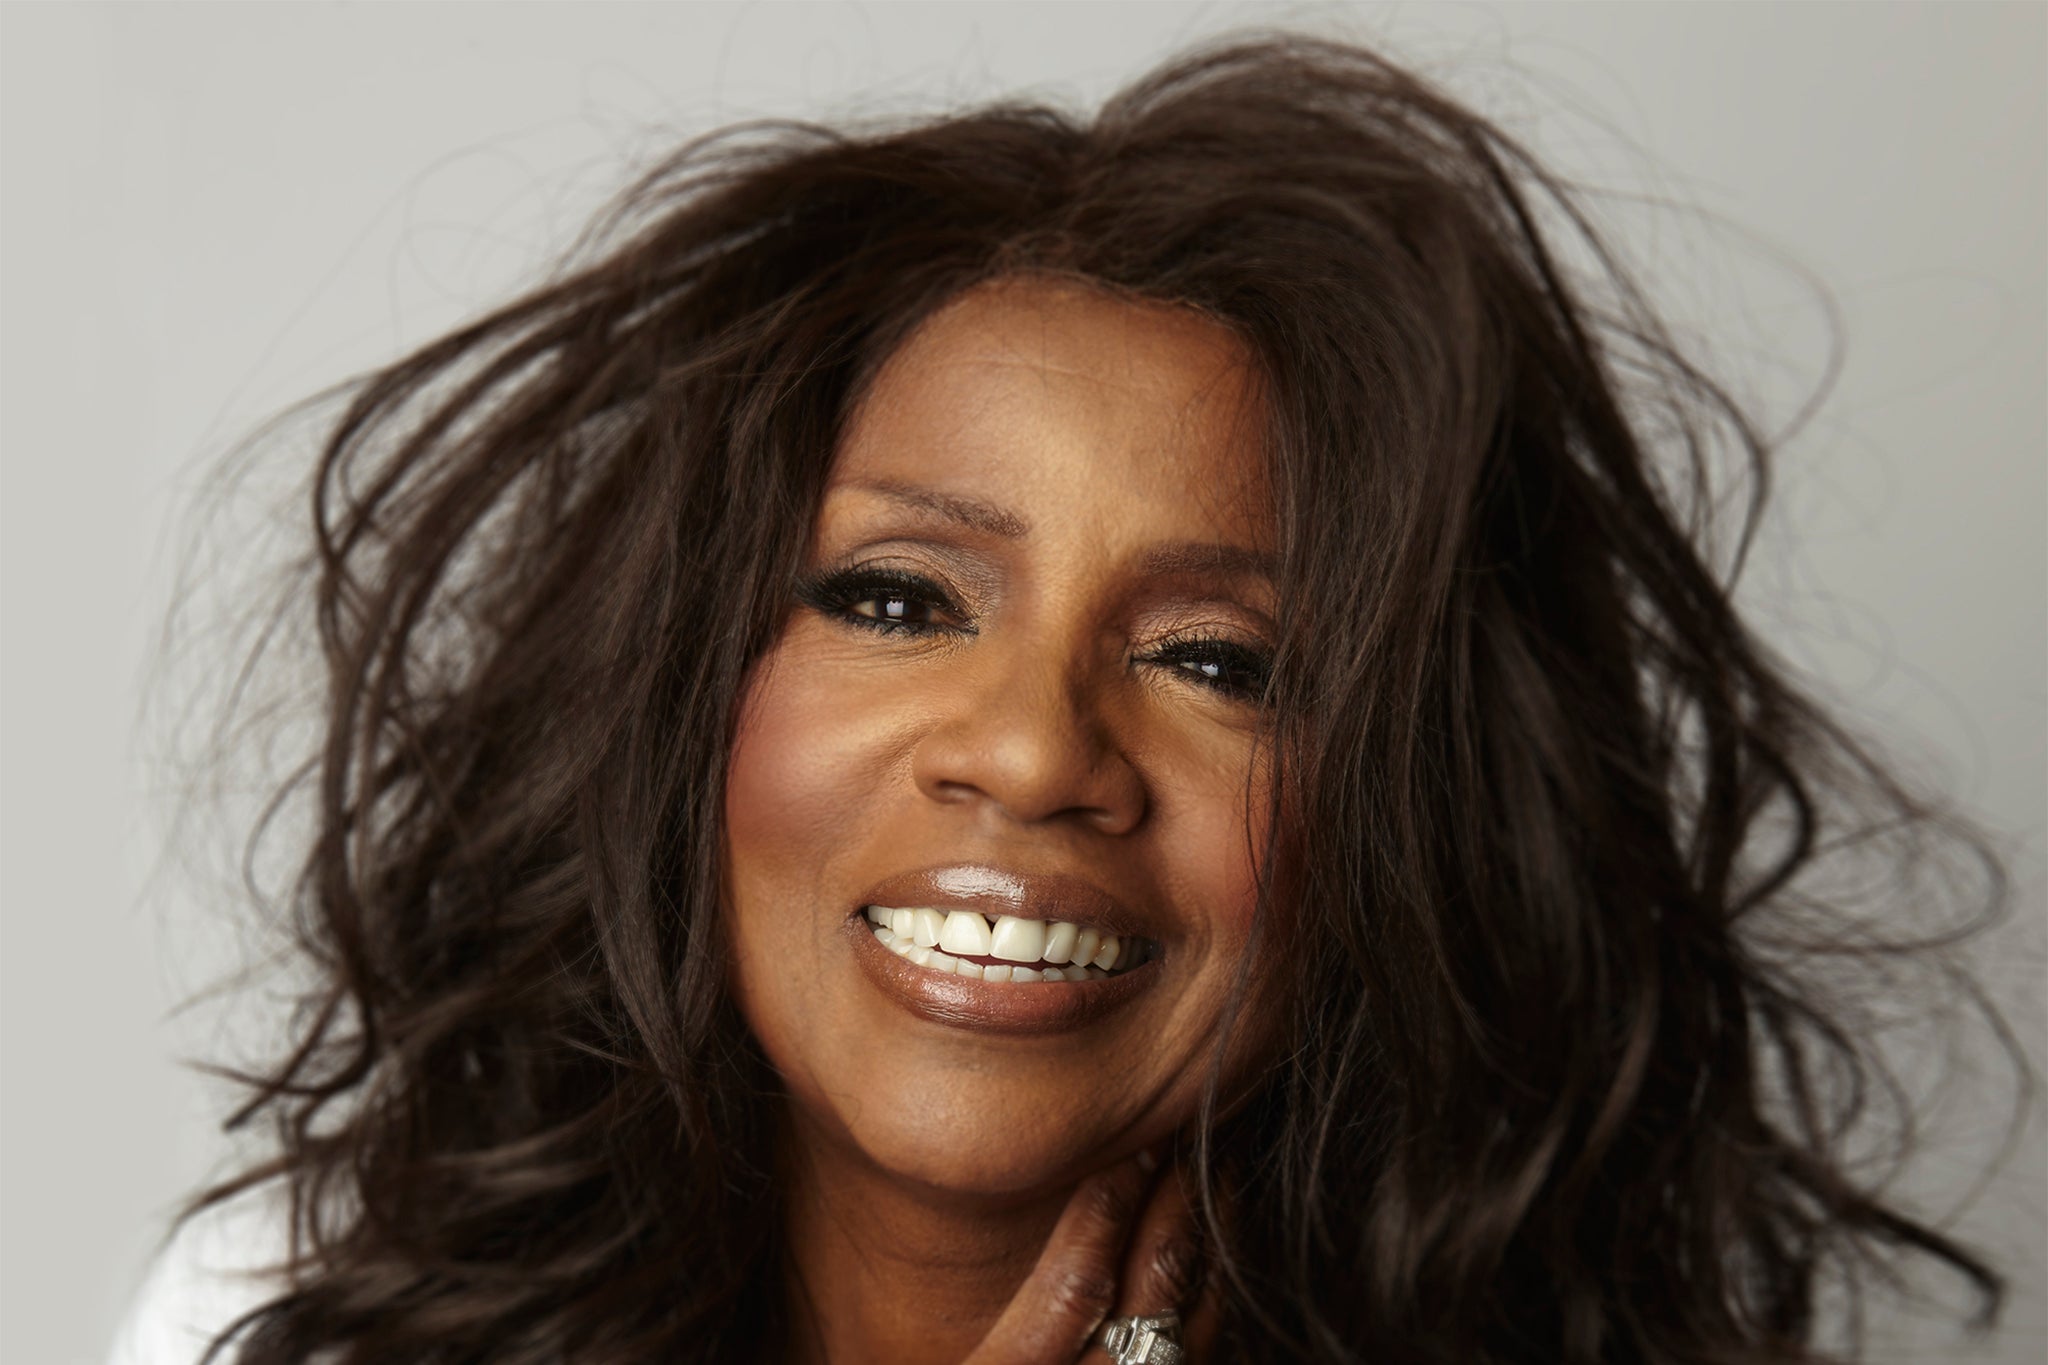 ‘This is someone who has faced difficult challenges head on,’ says Betsy Schechter, director of ‘Gloria Gaynor: I Will Survive’